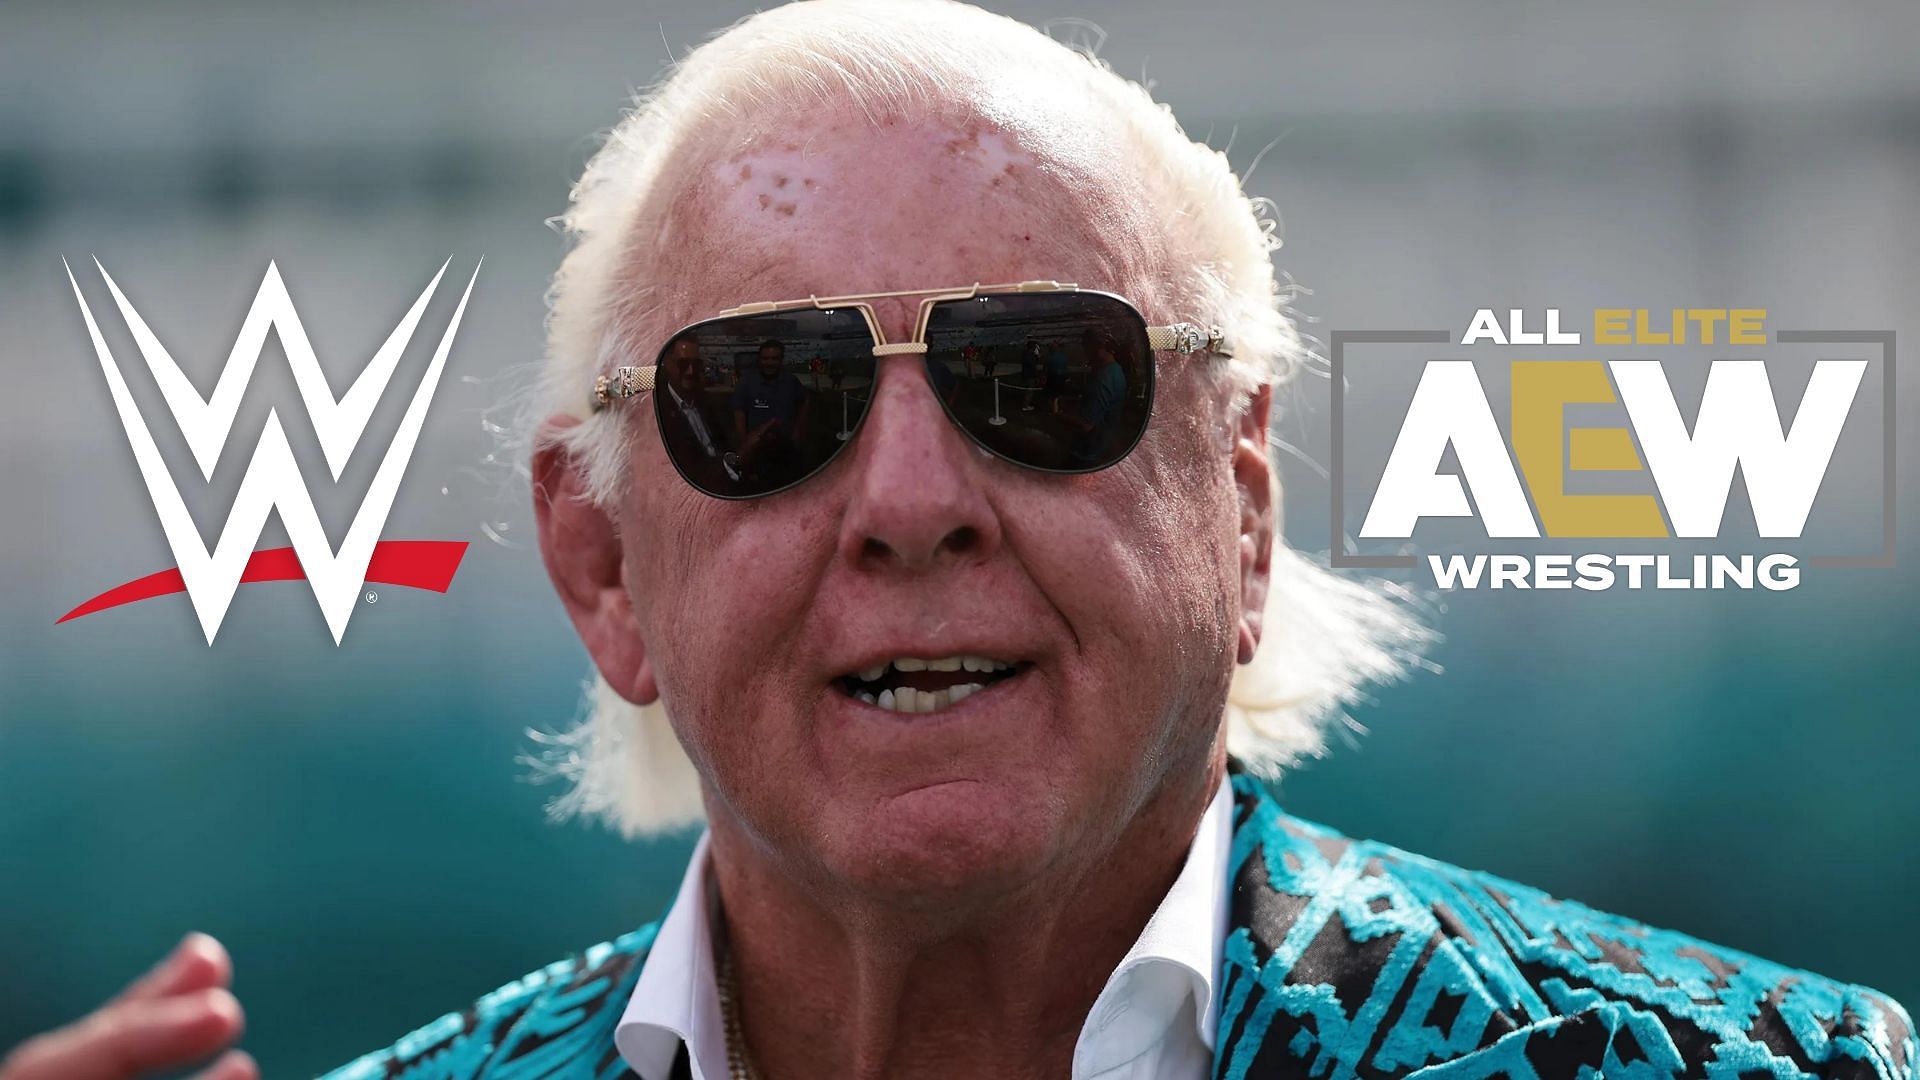 Ric Flair feels like an AEW star would have been incredible in WWE in his prime